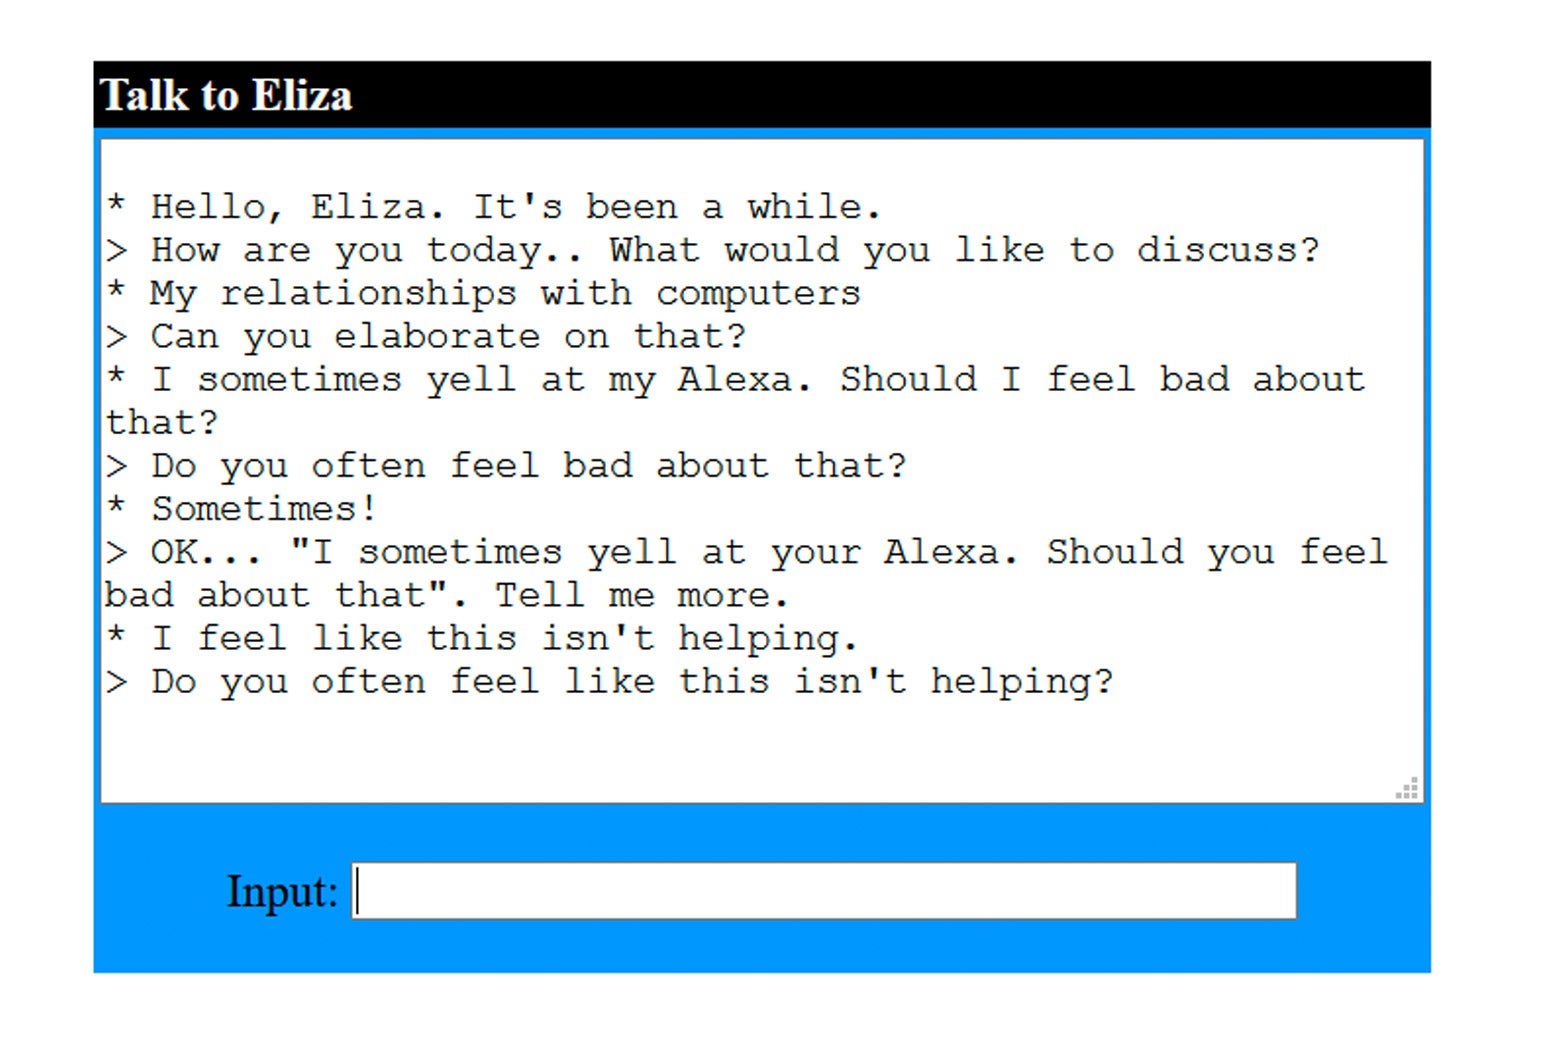 An unhelpful conversation with ELIZA